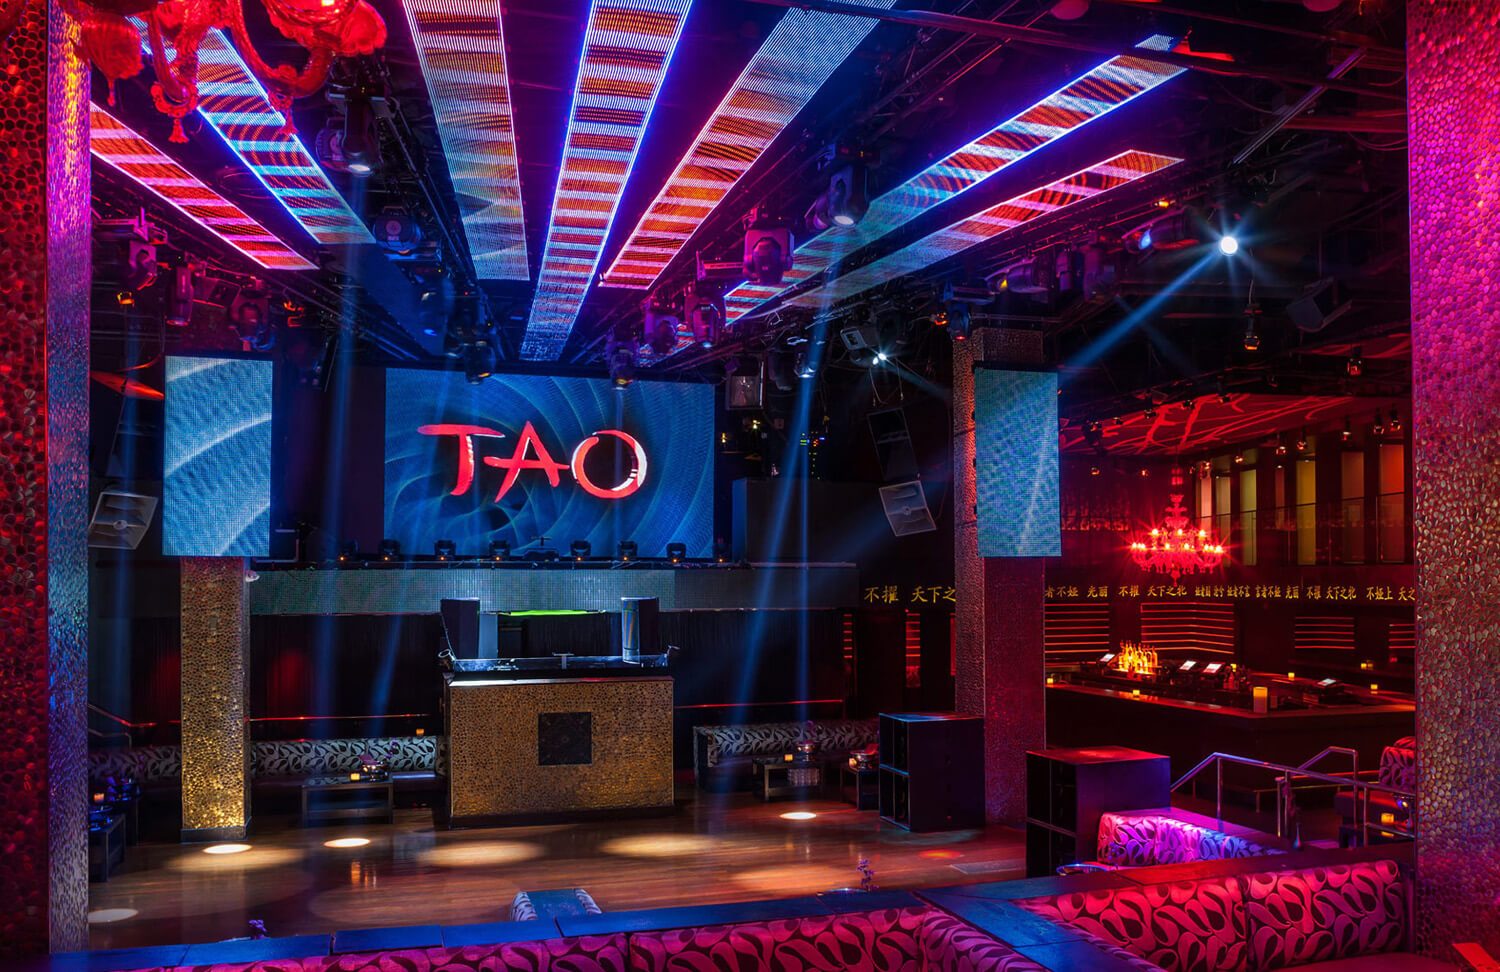 Tao Lounge tickets and lineup on Jan 28, 2021 at Tao at the